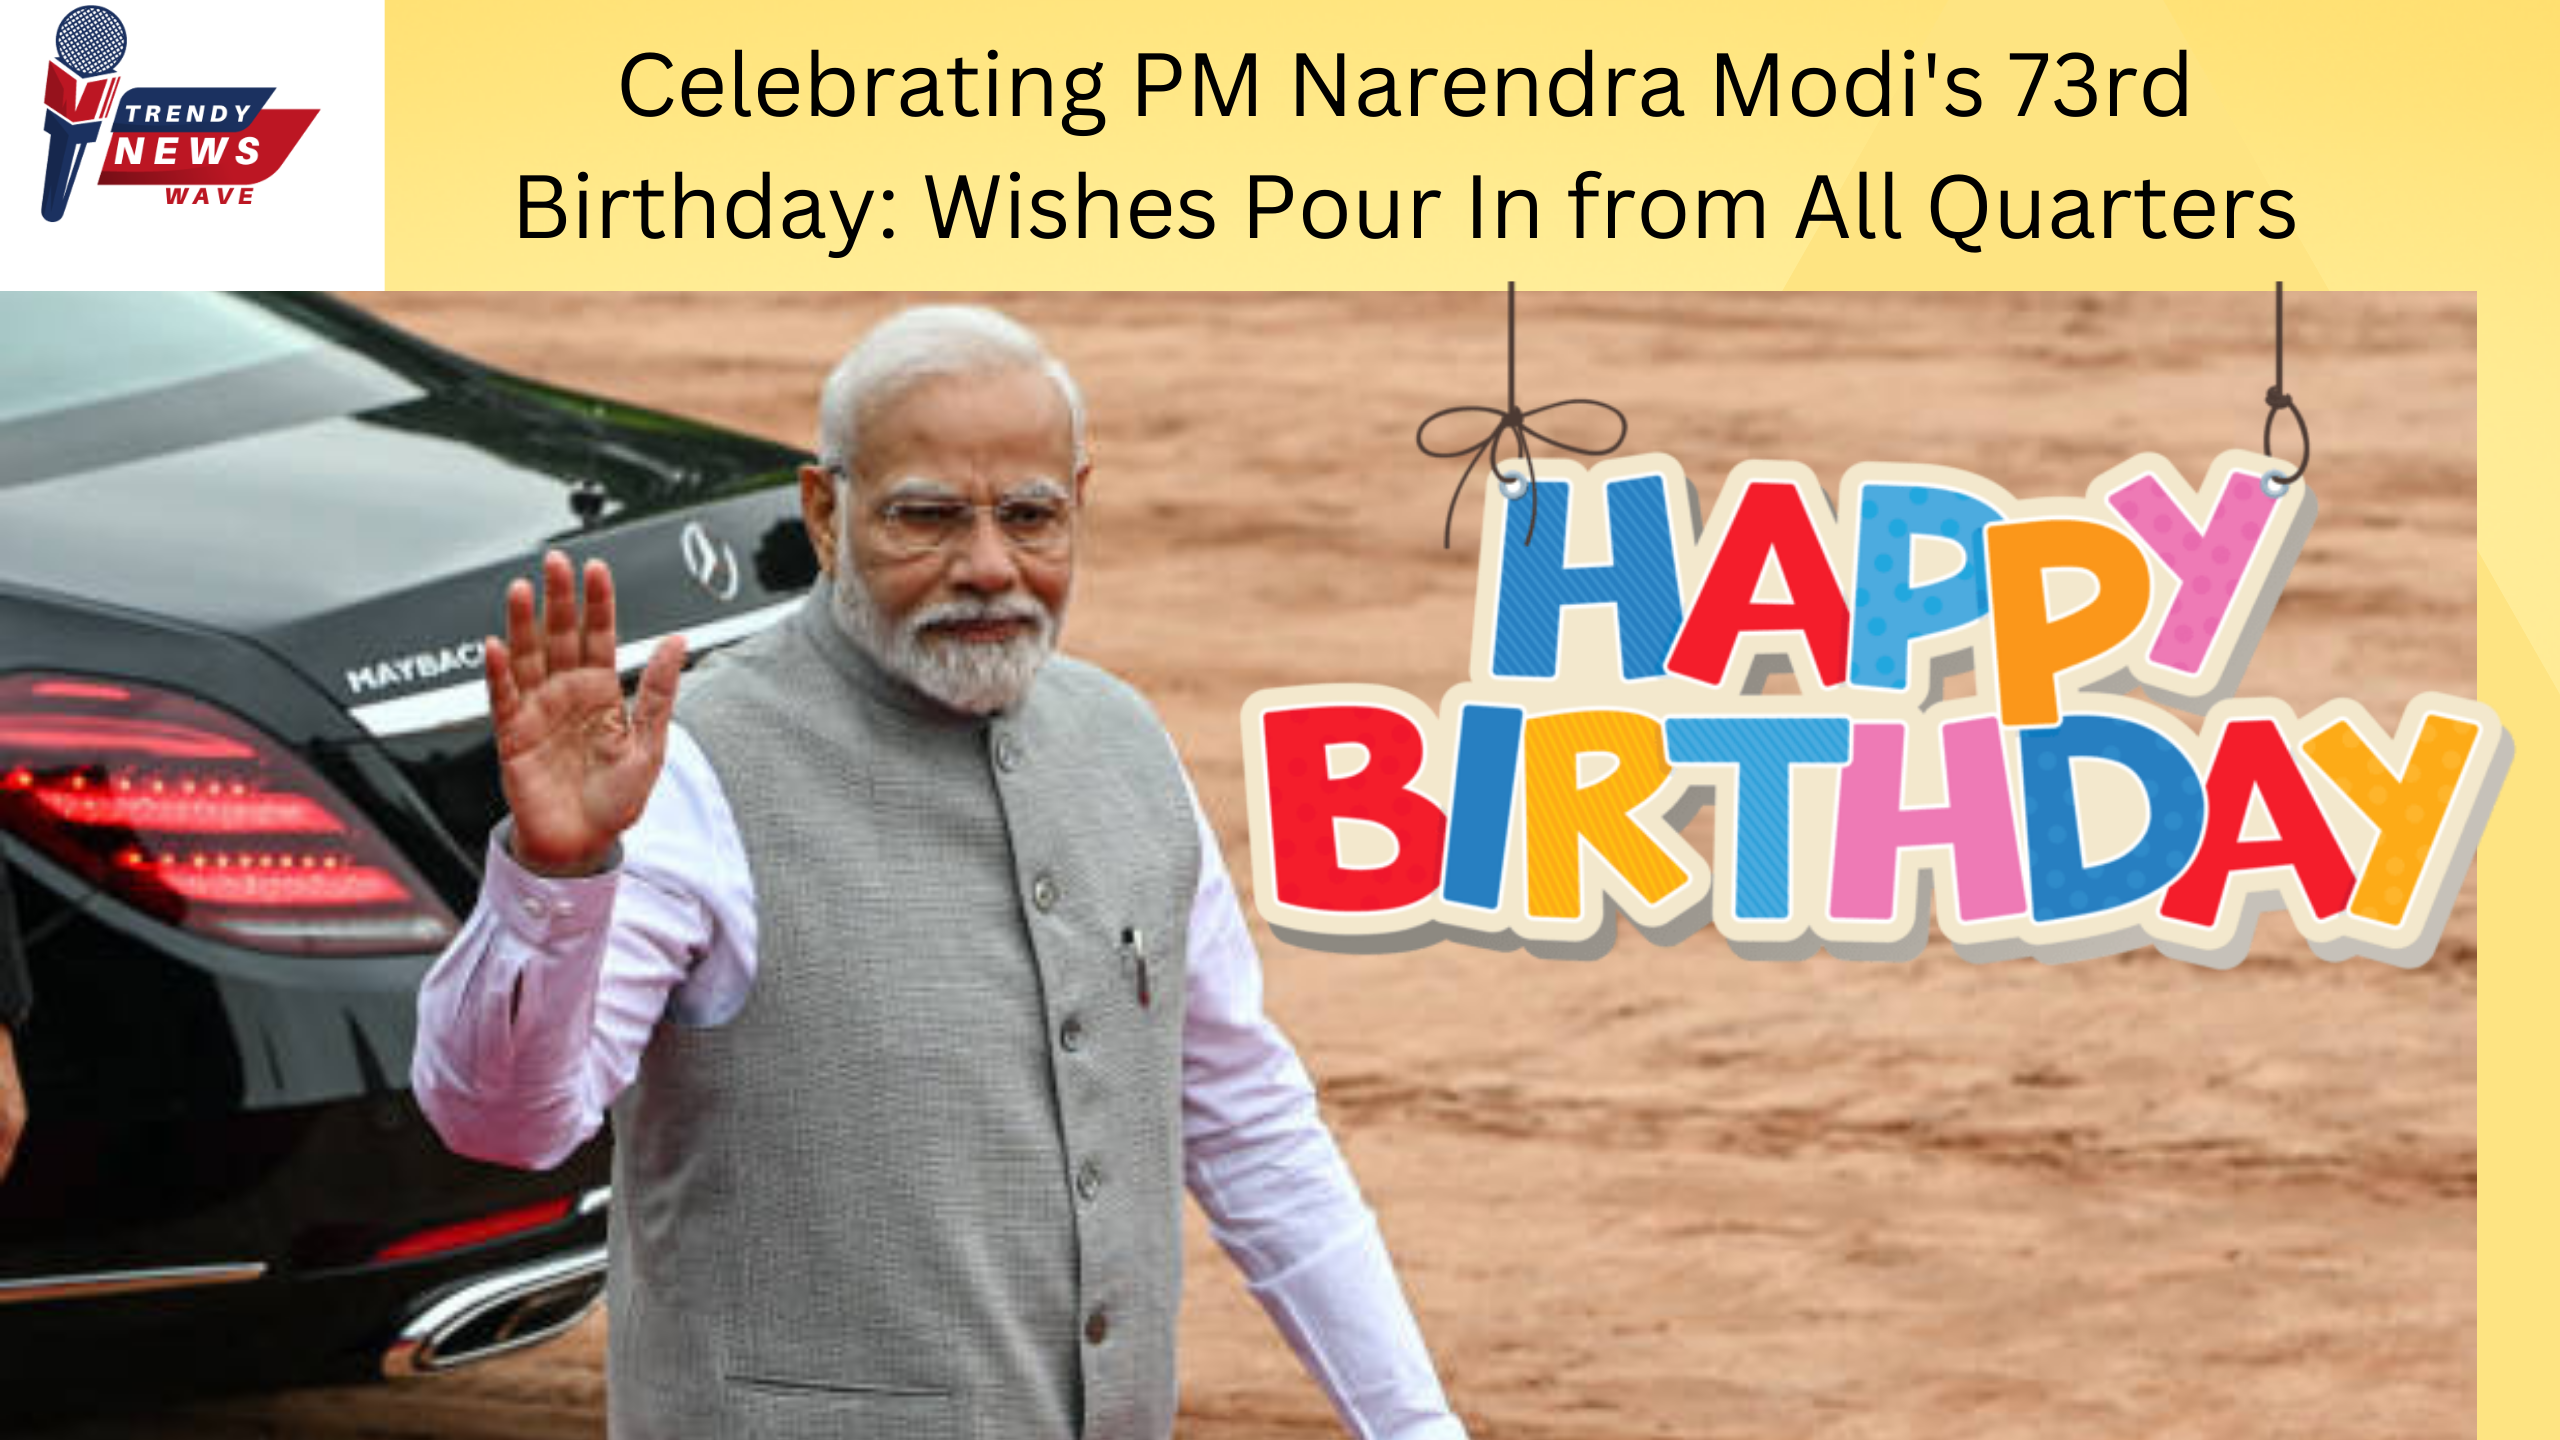 Celebrating PM Narendra Modi's 73rd Birthday: Wishes Pour In from All Quarters